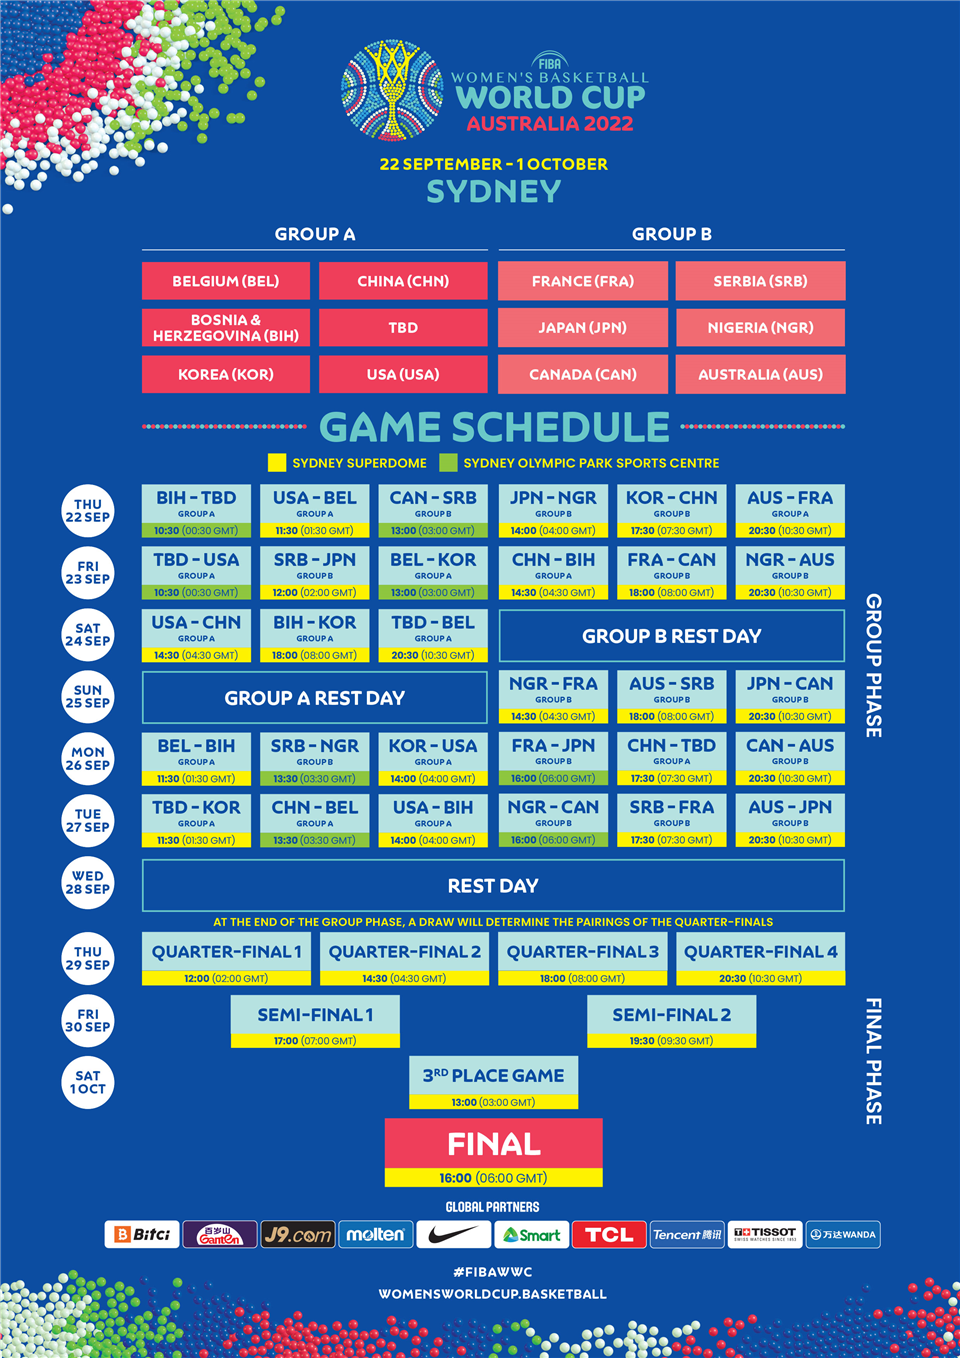 Excitement levels build as FIBA Womens Basketball World Cup 2022 schedule is finalized - FIBA Womens Basketball World Cup 2022